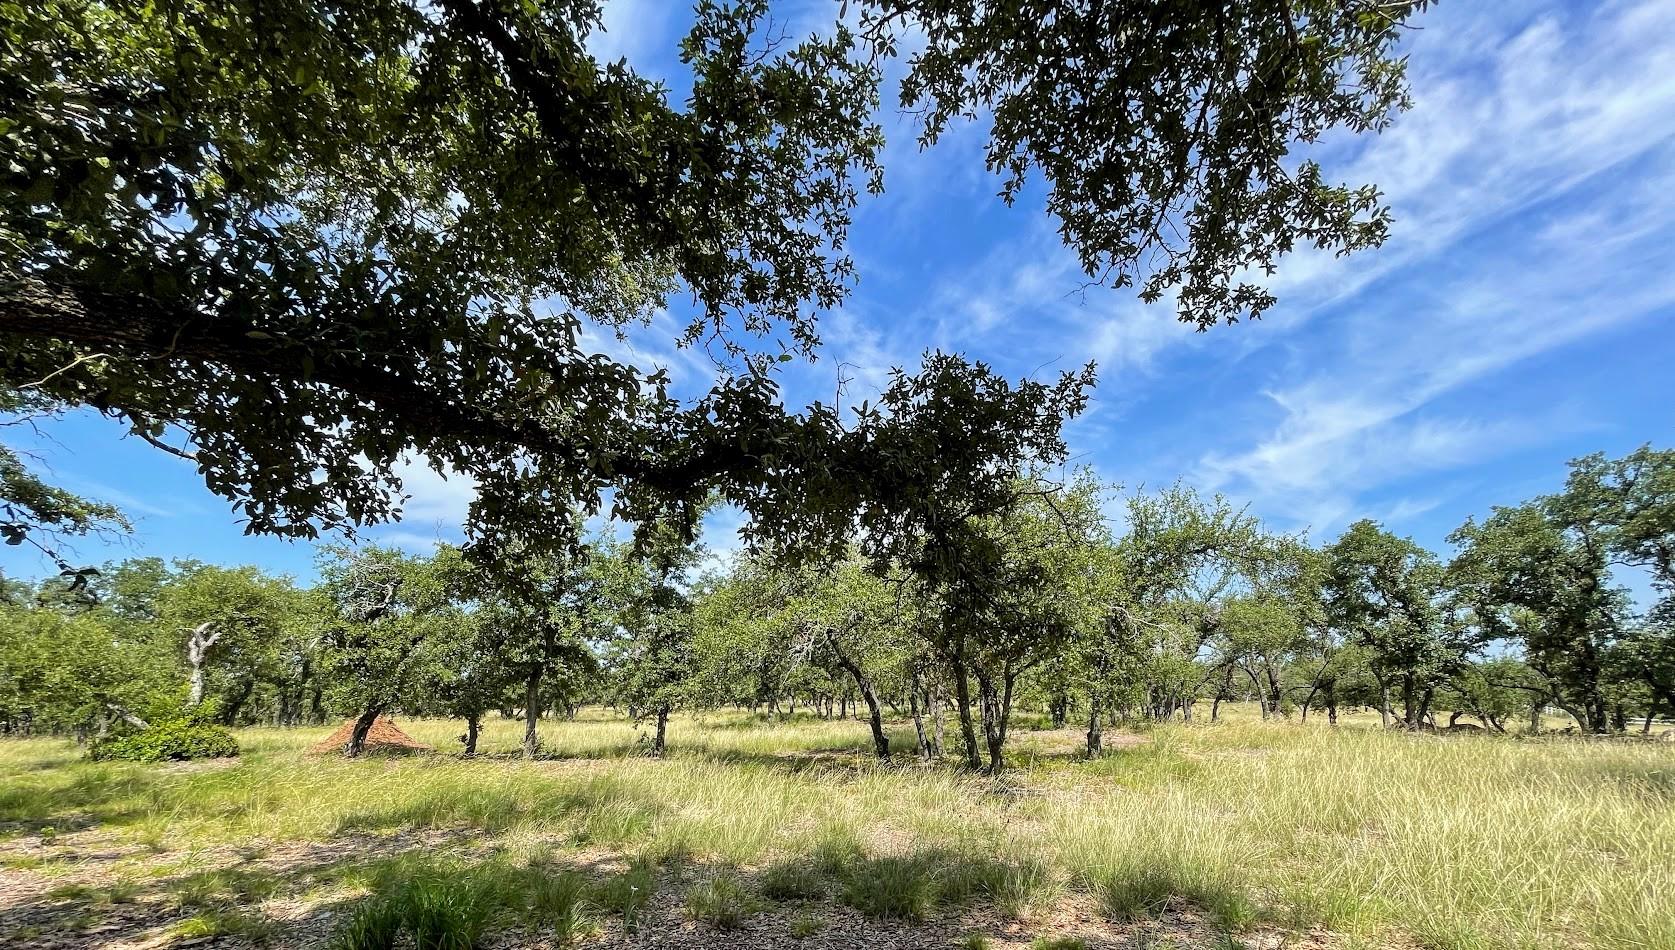 View Dripping Springs, TX 78620 land